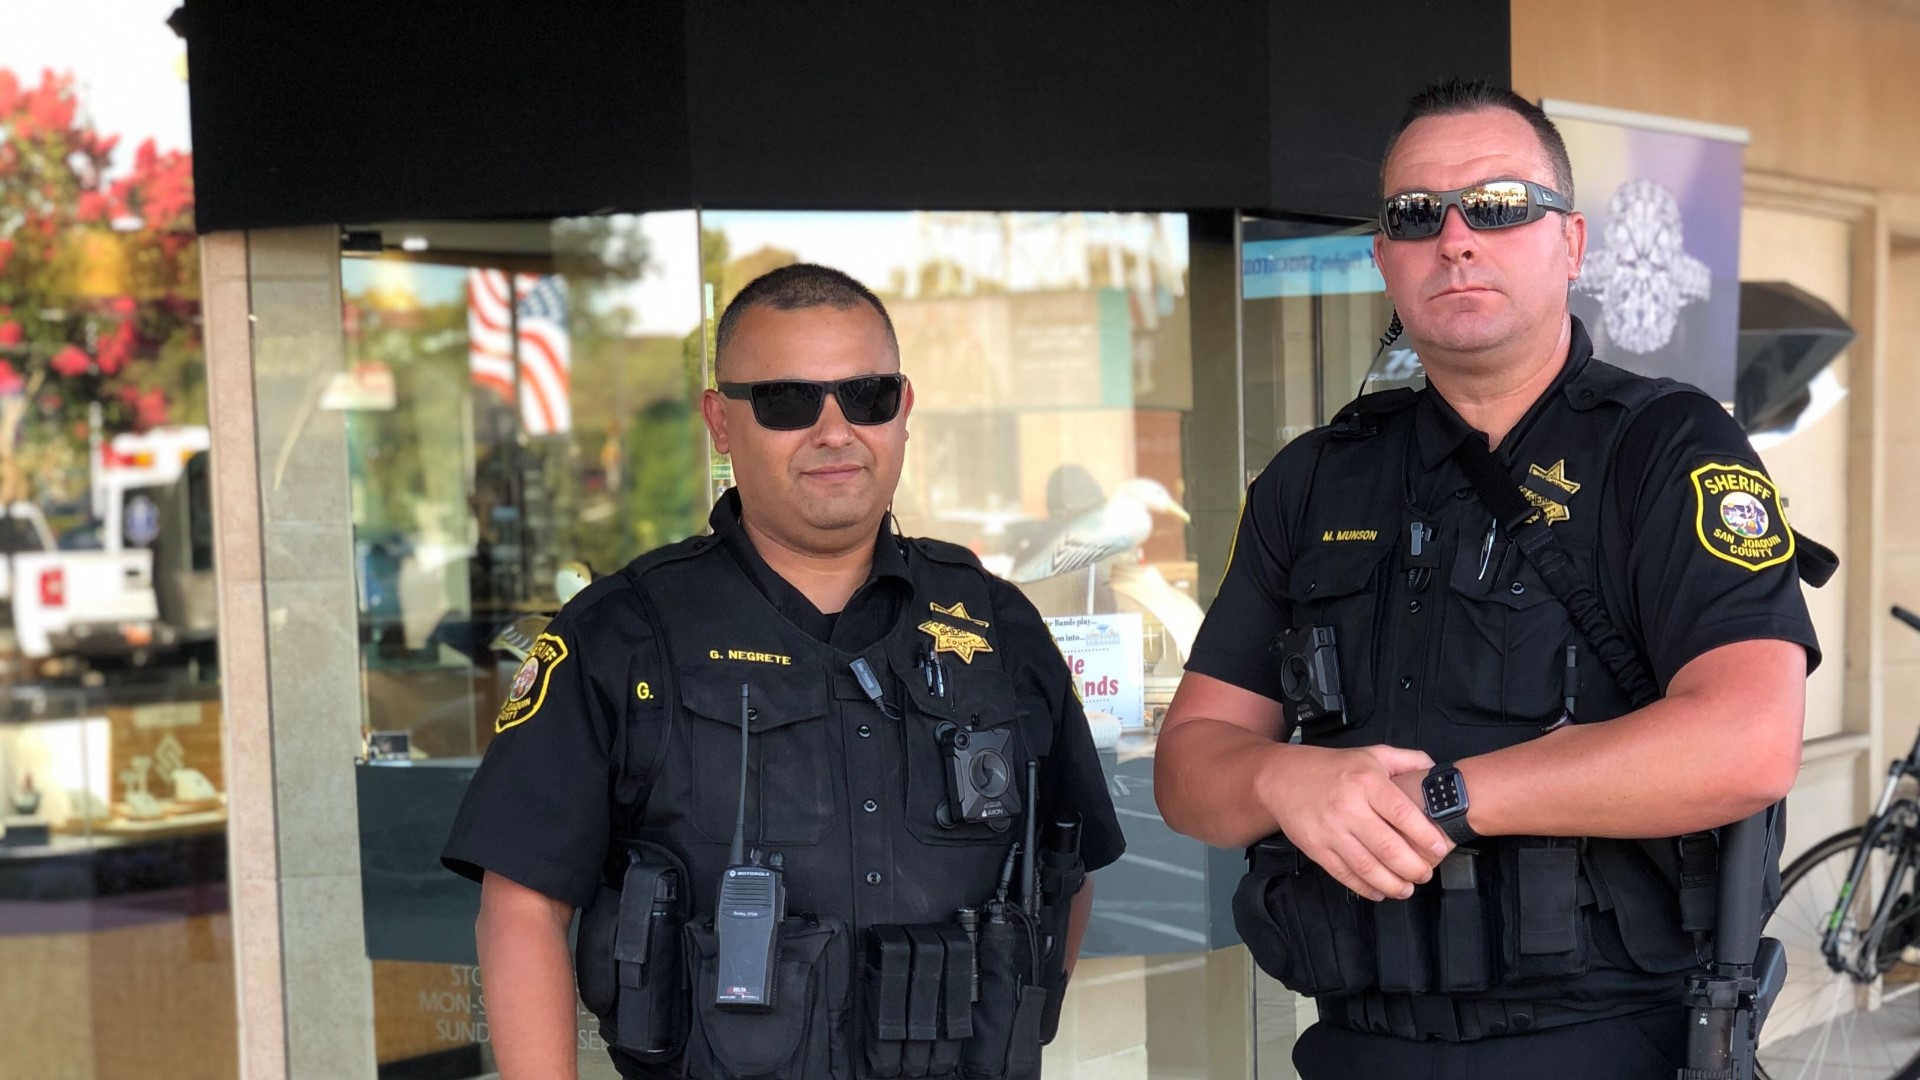 National tragedies have prompted a first-ever move by the San Joaquin County Sheriff's Department as deputies carry rifles at community events to deter threats.